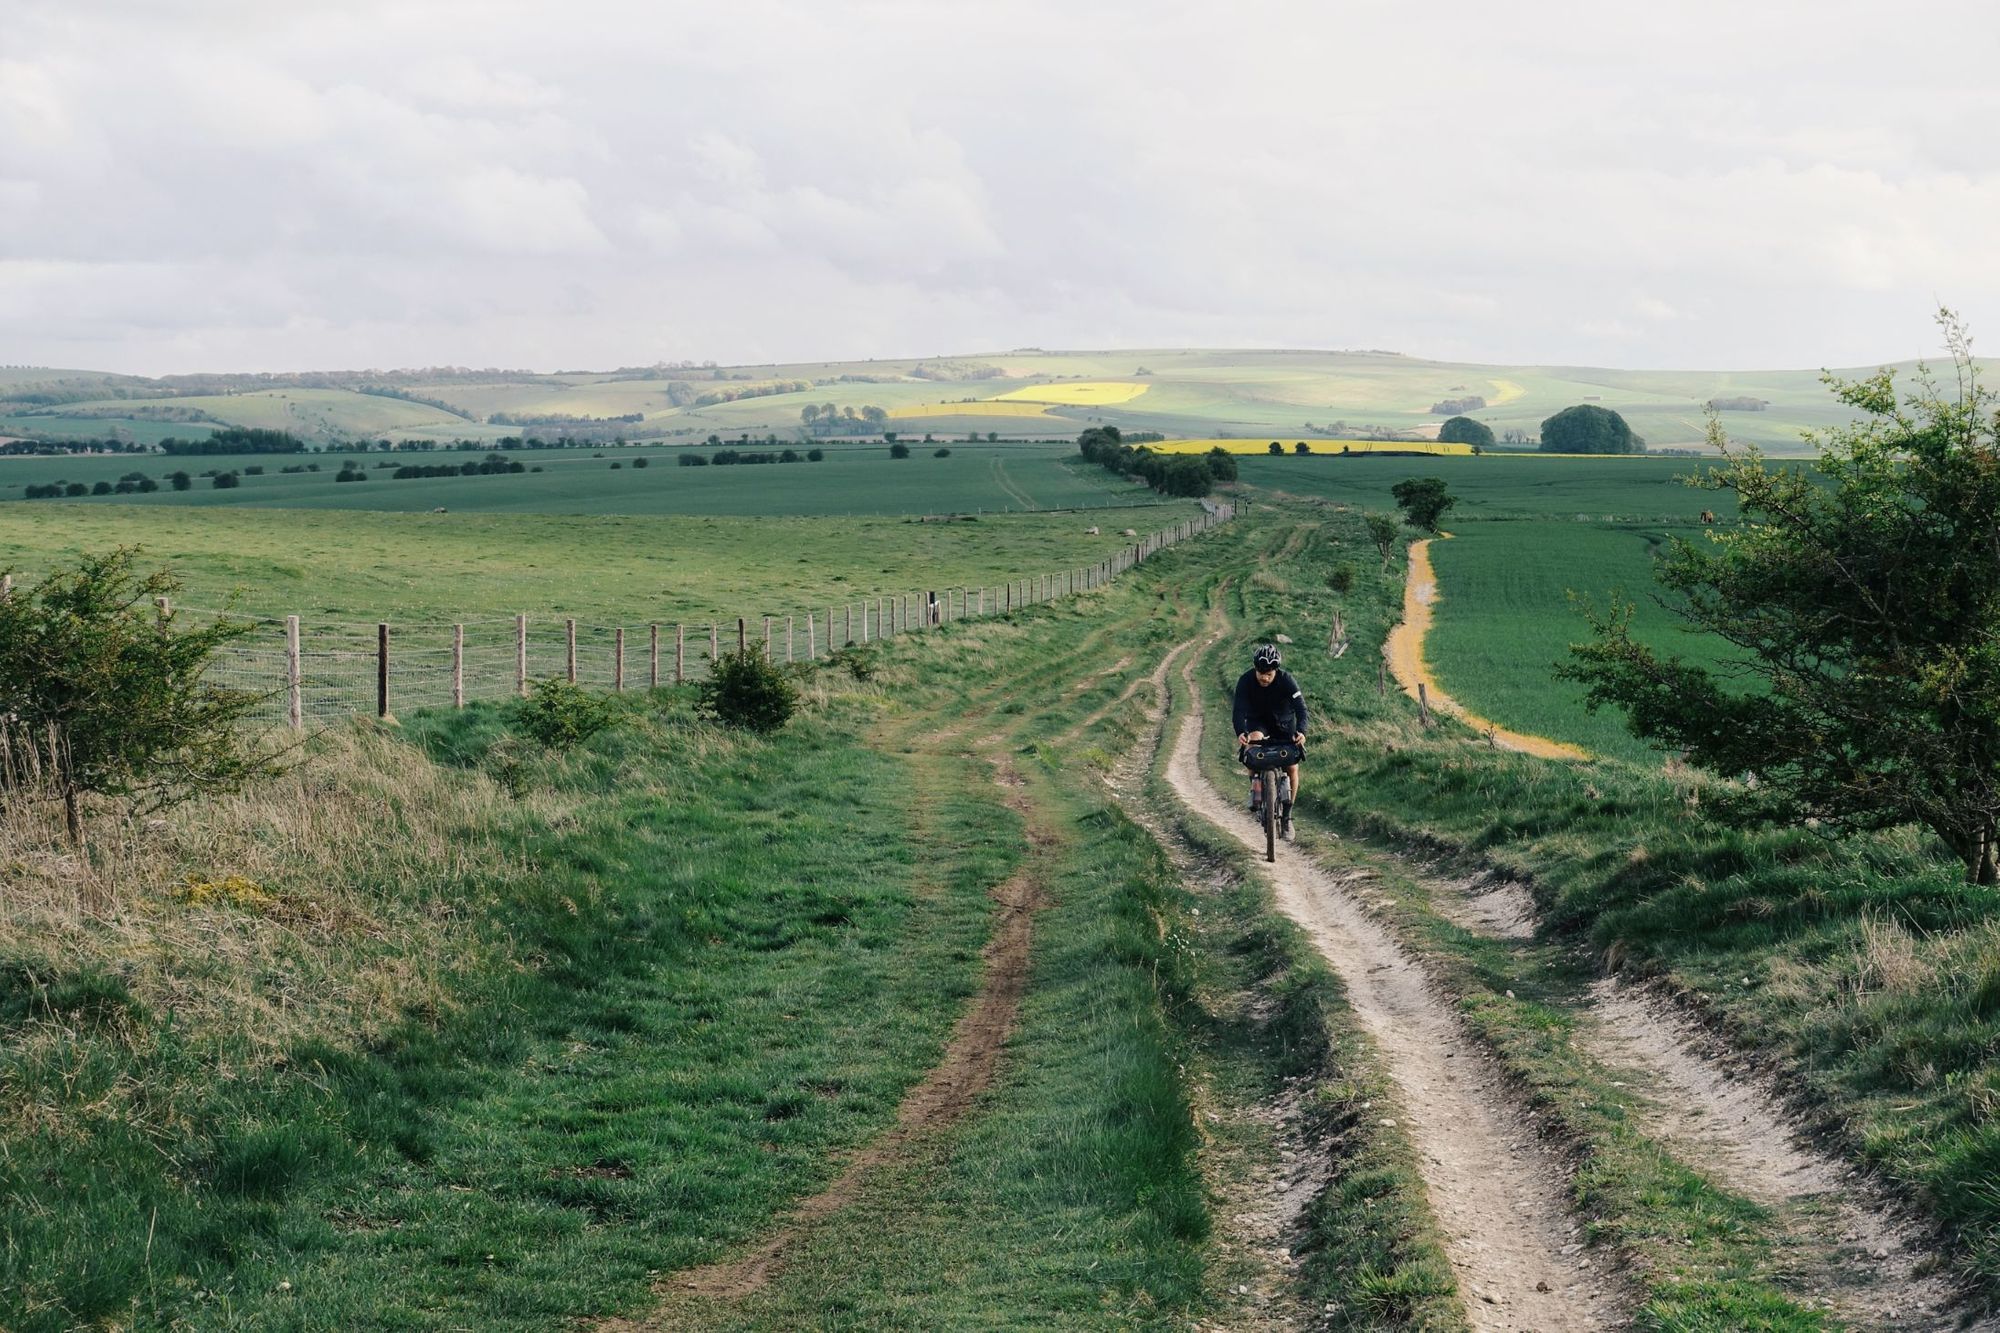 A classic scene on the Old Chalk Way, while riding on the Wessex Ridgeway on the route. Photo: Ben Wormald / Old Chalk Way